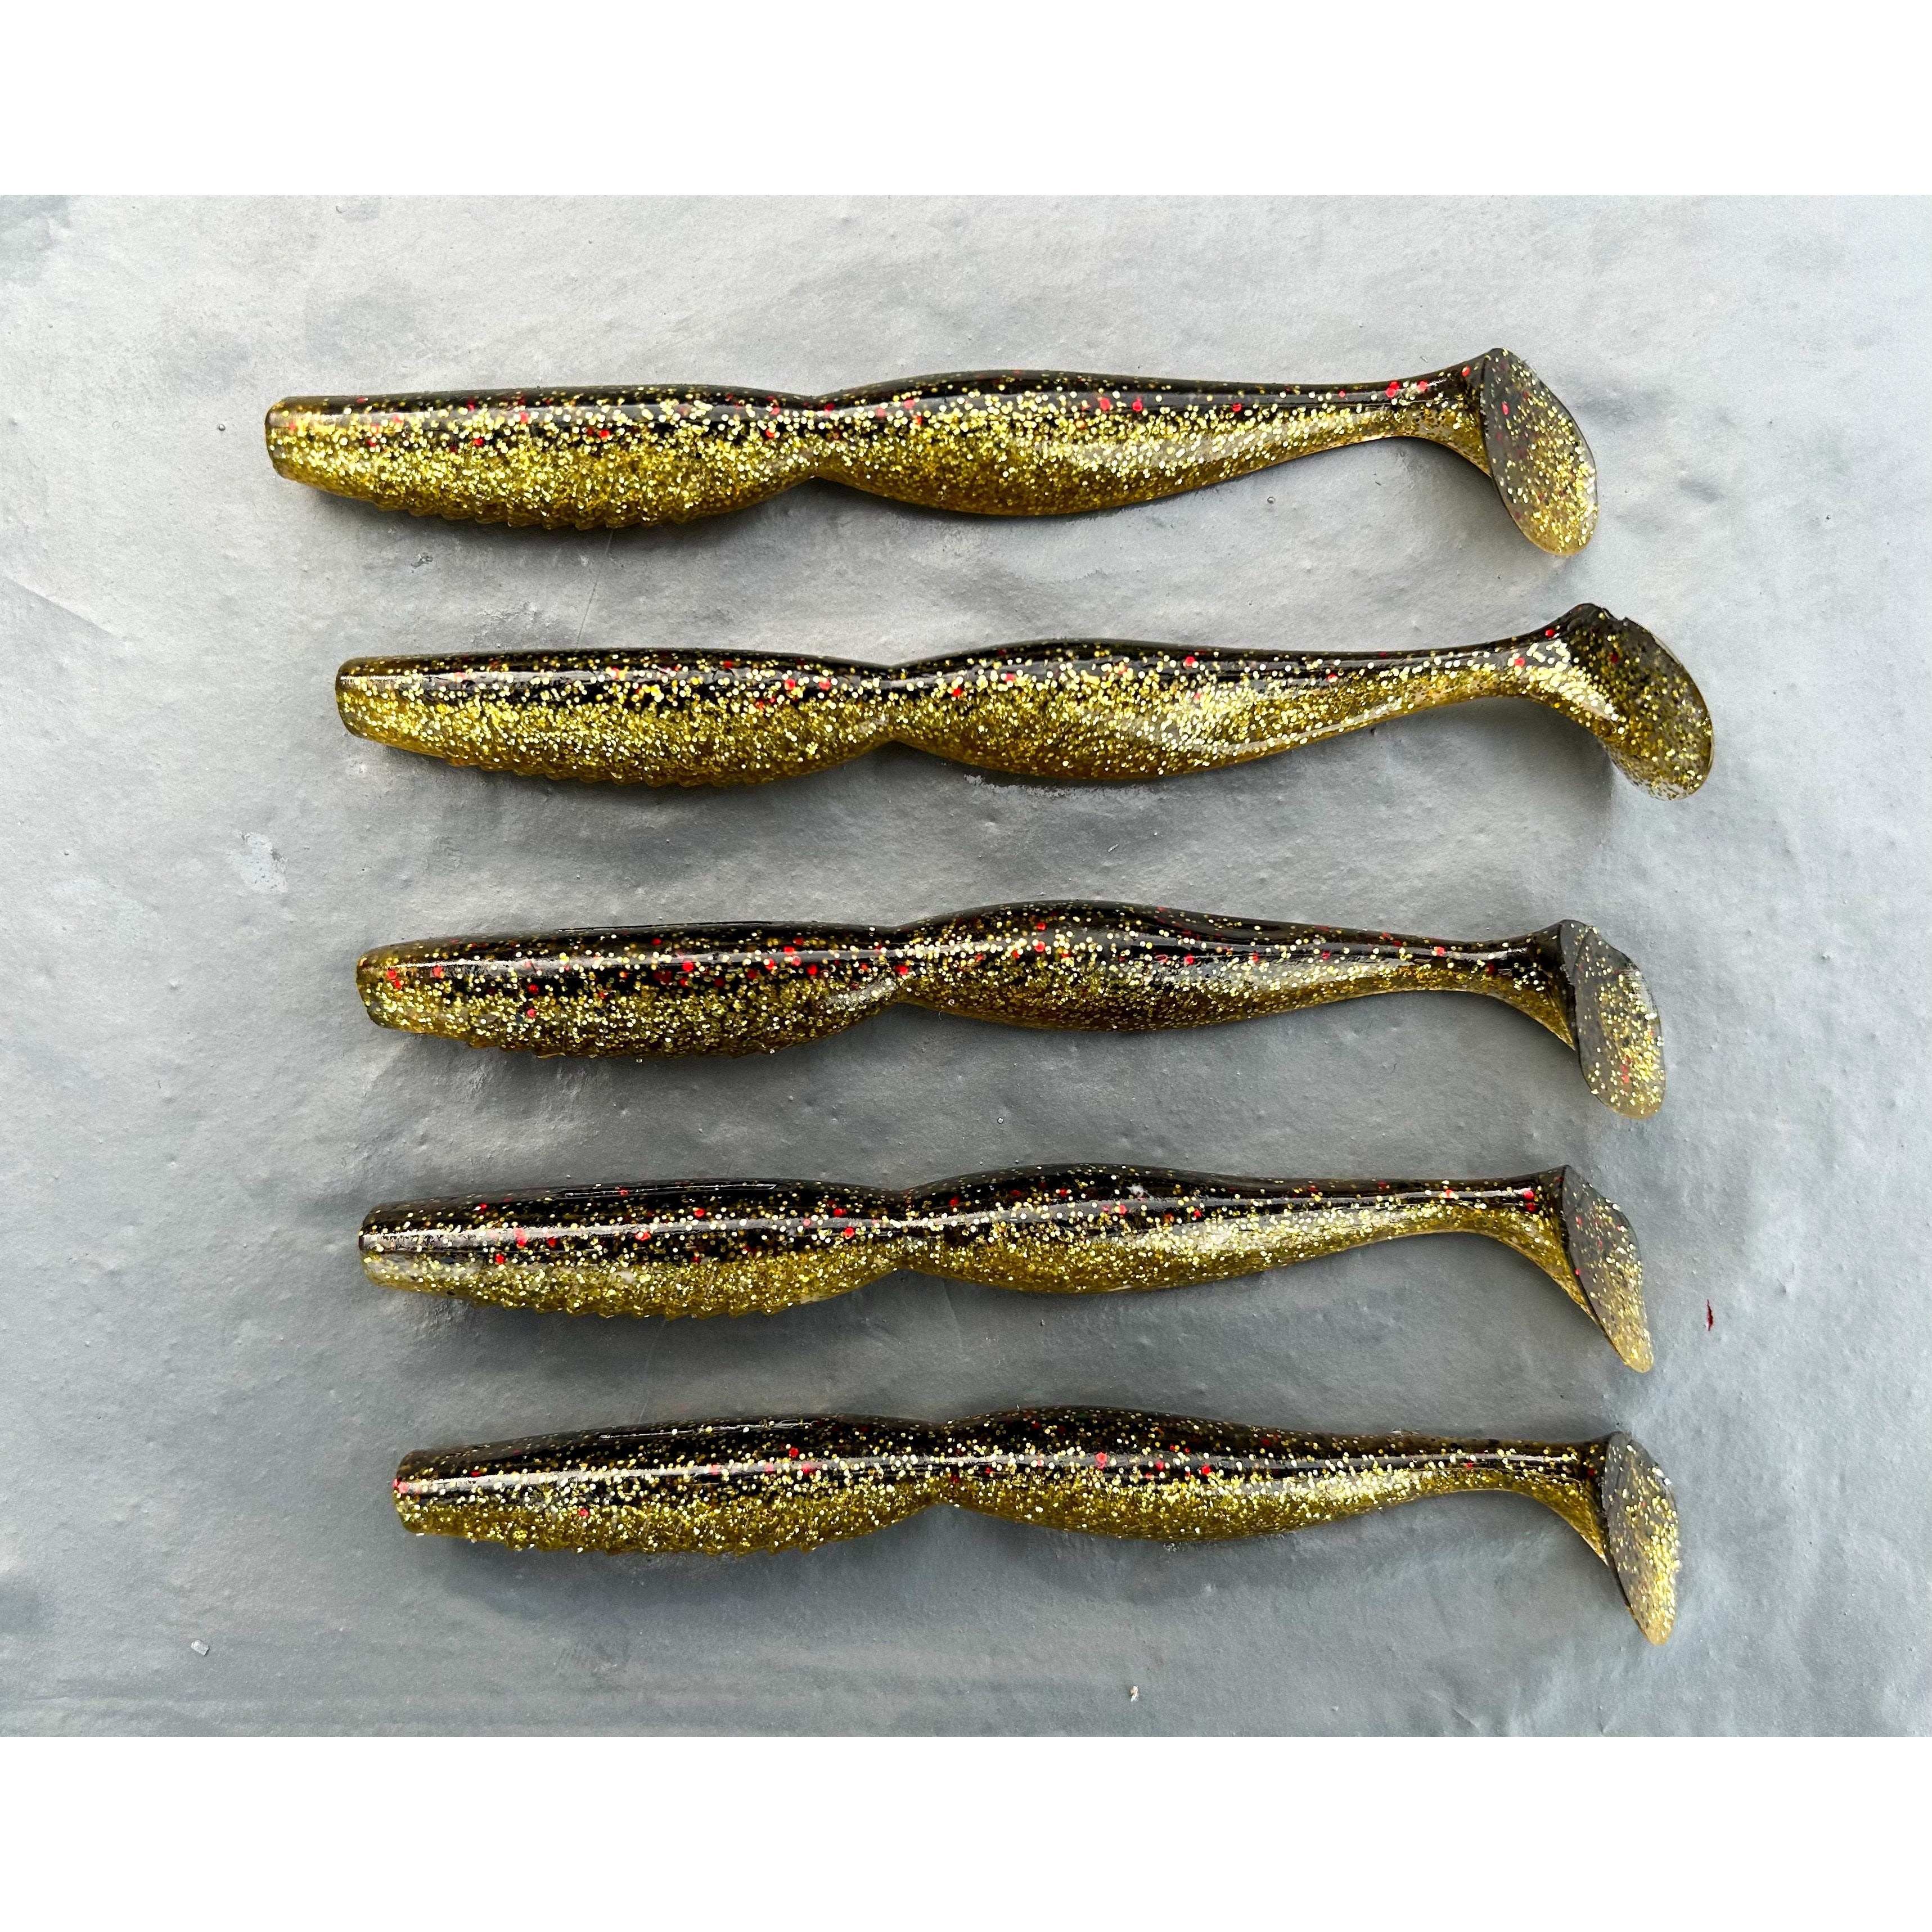 5” Spindle Paddletail Spinner Lure Sets